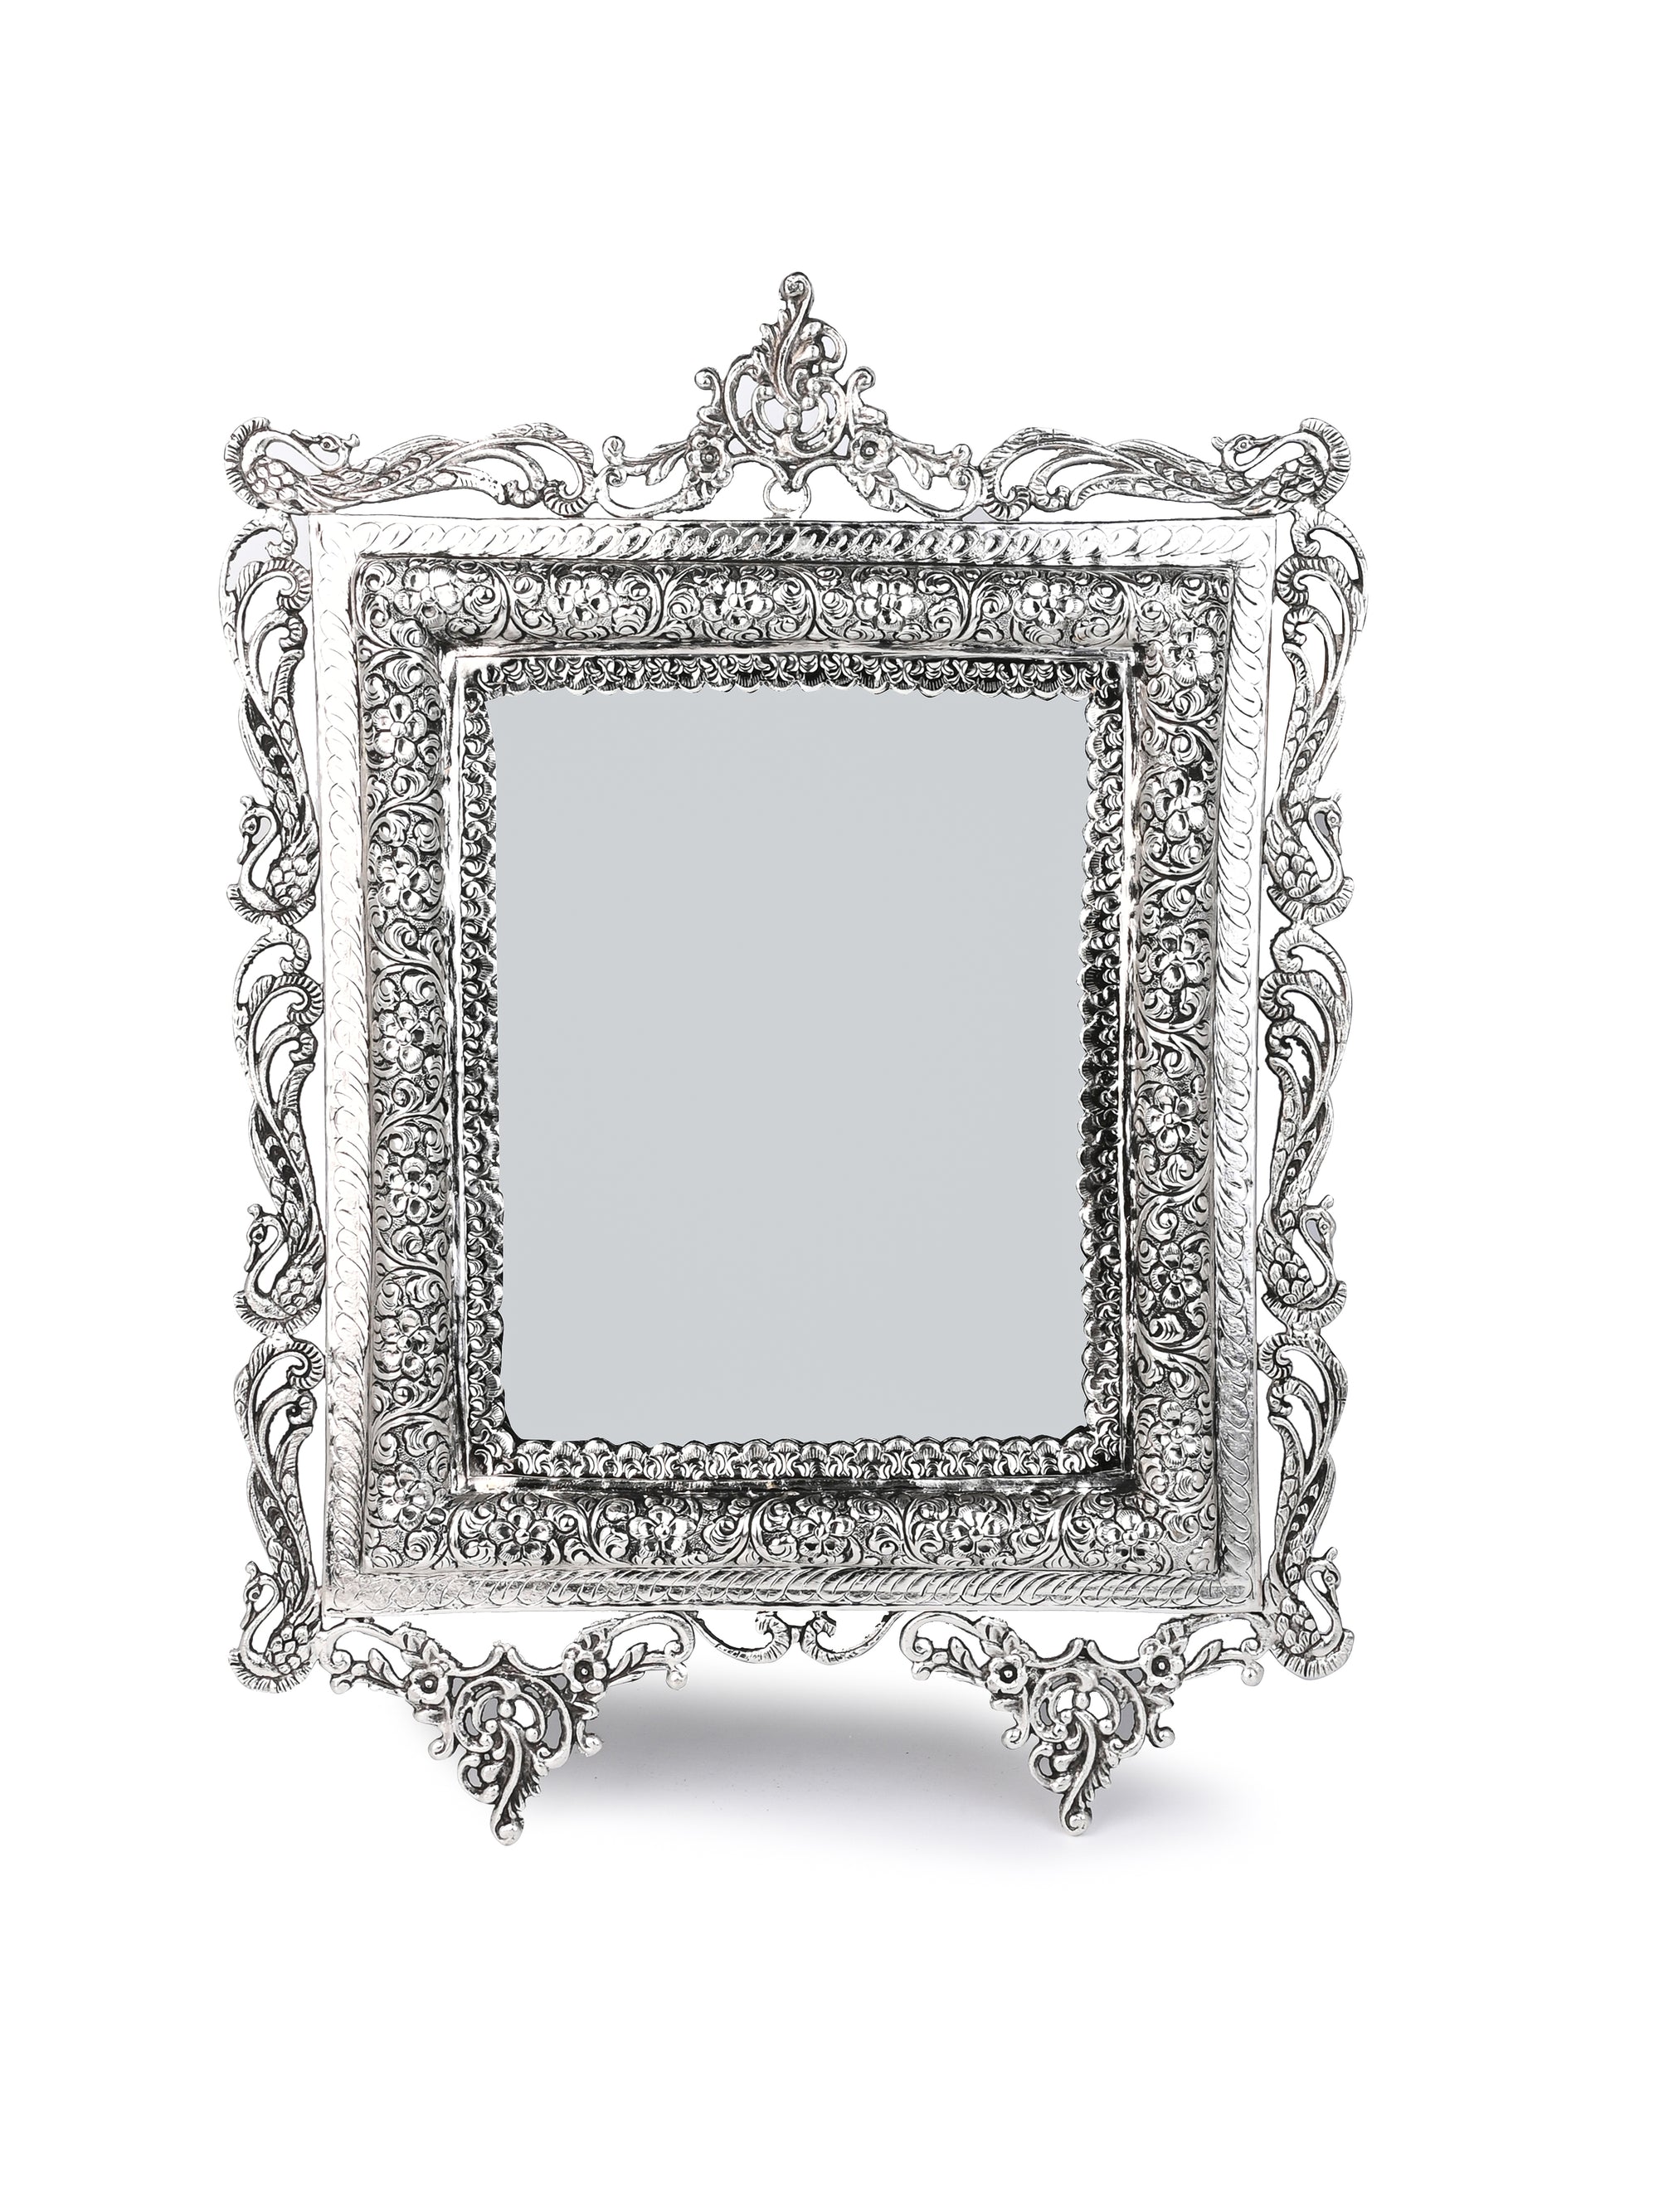 Oxidized Silver Finish Vintage Charm Rectangular Wall Mirror - 16 inches